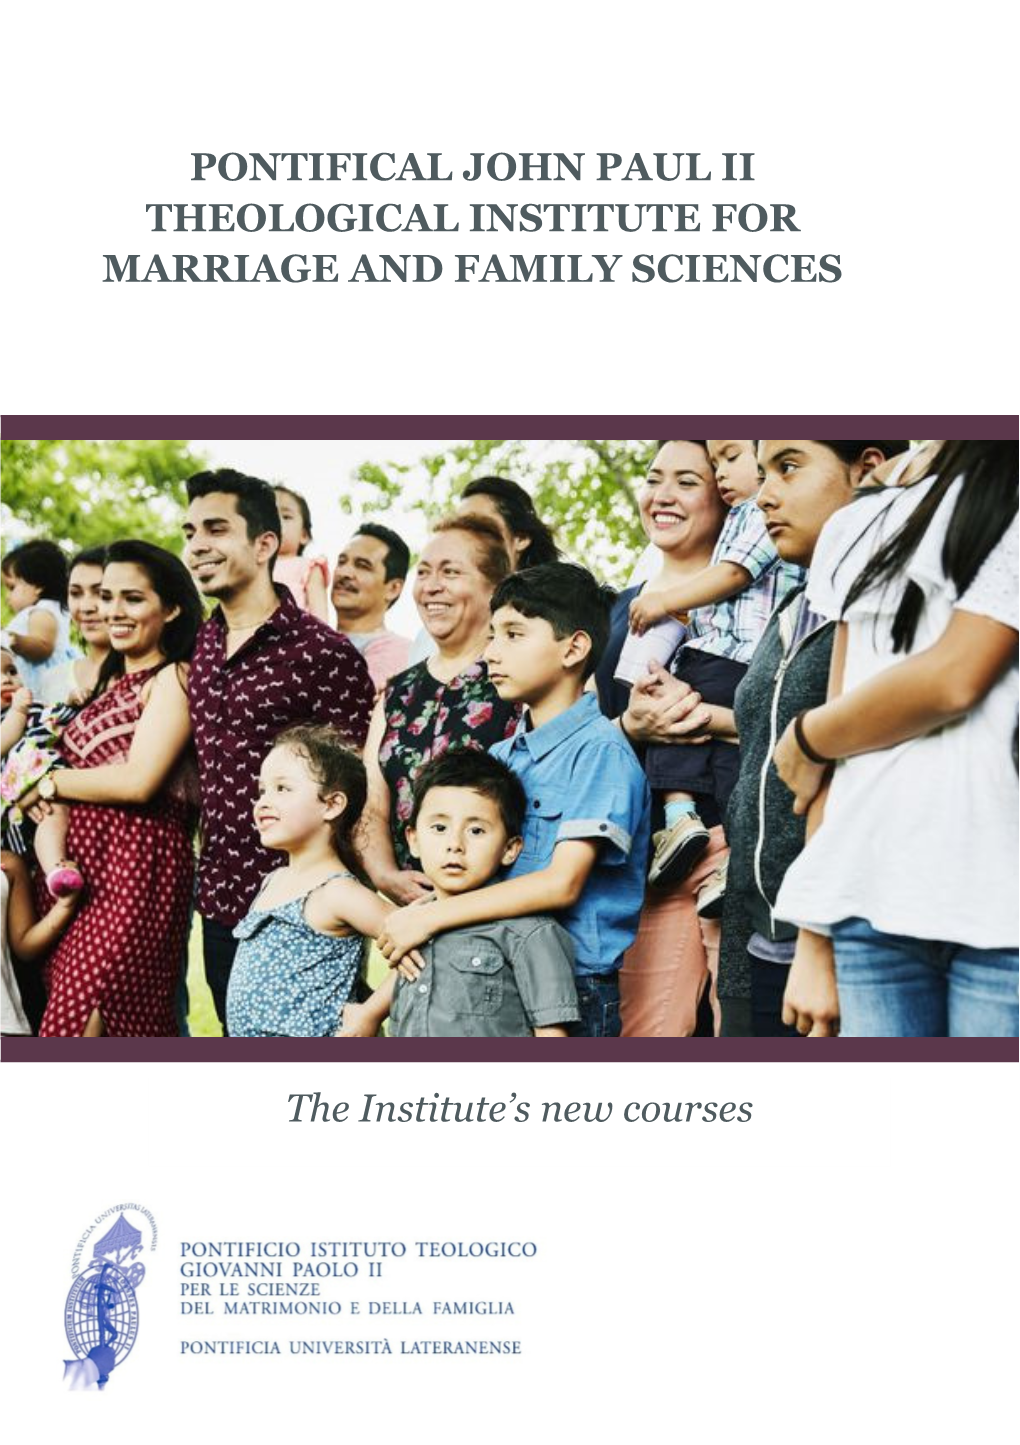 The Institute's New Courses PONTIFICAL JOHN PAUL II THEOLOGICAL INSTITUTE for MARRIAGE and FAMILY SCIENCES